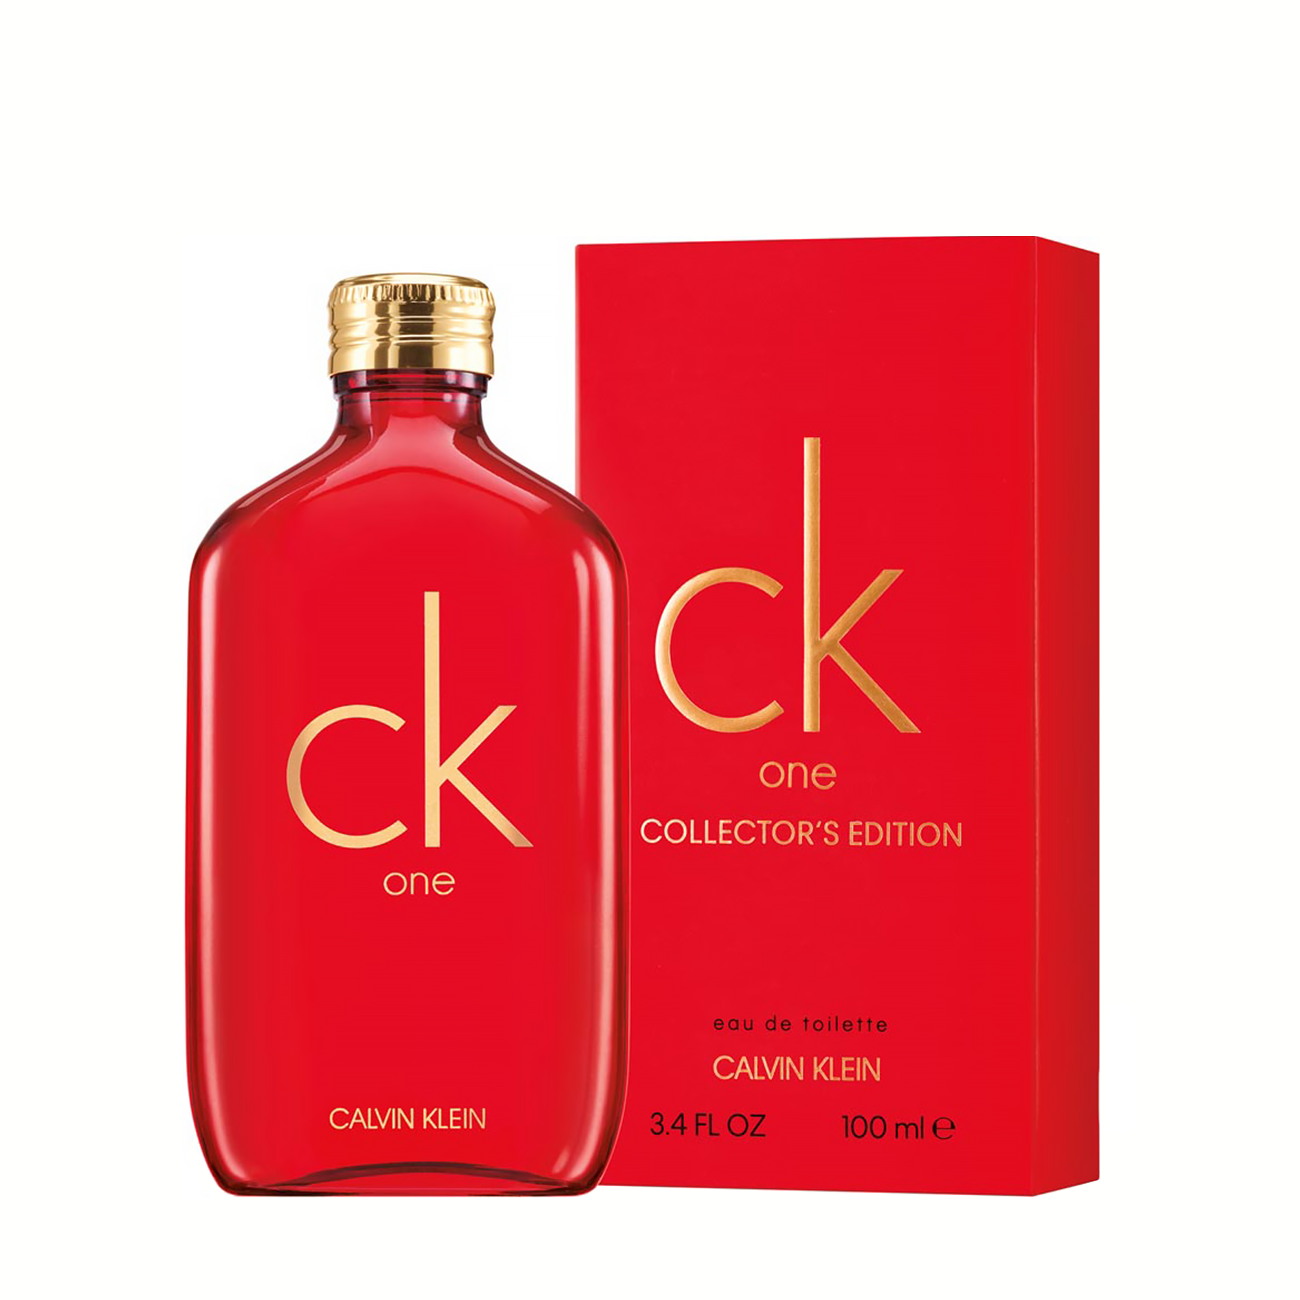 CK ONE COLLECTOR’S EDITION 100 ml